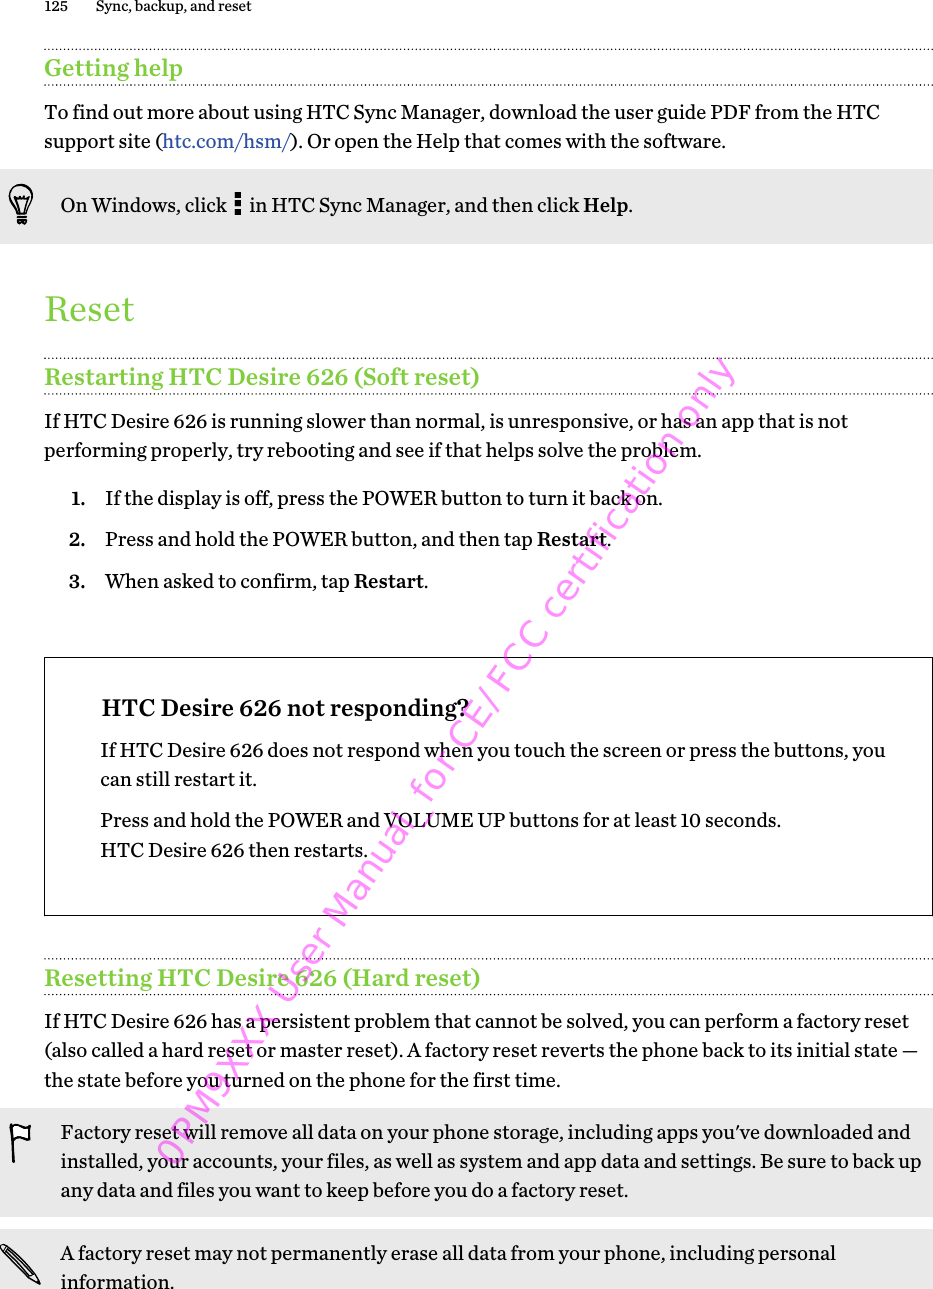 Getting helpTo find out more about using HTC Sync Manager, download the user guide PDF from the HTCsupport site (htc.com/hsm/). Or open the Help that comes with the software.On Windows, click   in HTC Sync Manager, and then click Help.ResetRestarting HTC Desire 626 (Soft reset)If HTC Desire 626 is running slower than normal, is unresponsive, or has an app that is notperforming properly, try rebooting and see if that helps solve the problem.1. If the display is off, press the POWER button to turn it back on.2. Press and hold the POWER button, and then tap Restart.3. When asked to confirm, tap Restart.HTC Desire 626 not responding?If HTC Desire 626 does not respond when you touch the screen or press the buttons, youcan still restart it.Press and hold the POWER and VOLUME UP buttons for at least 10 seconds.HTC Desire 626 then restarts.Resetting HTC Desire 626 (Hard reset)If HTC Desire 626 has a persistent problem that cannot be solved, you can perform a factory reset(also called a hard reset or master reset). A factory reset reverts the phone back to its initial state —the state before you turned on the phone for the first time.Factory reset will remove all data on your phone storage, including apps you&apos;ve downloaded andinstalled, your accounts, your files, as well as system and app data and settings. Be sure to back upany data and files you want to keep before you do a factory reset.A factory reset may not permanently erase all data from your phone, including personalinformation.125 Sync, backup, and reset0PM9XXX User Manual_for CE/FCC certification only